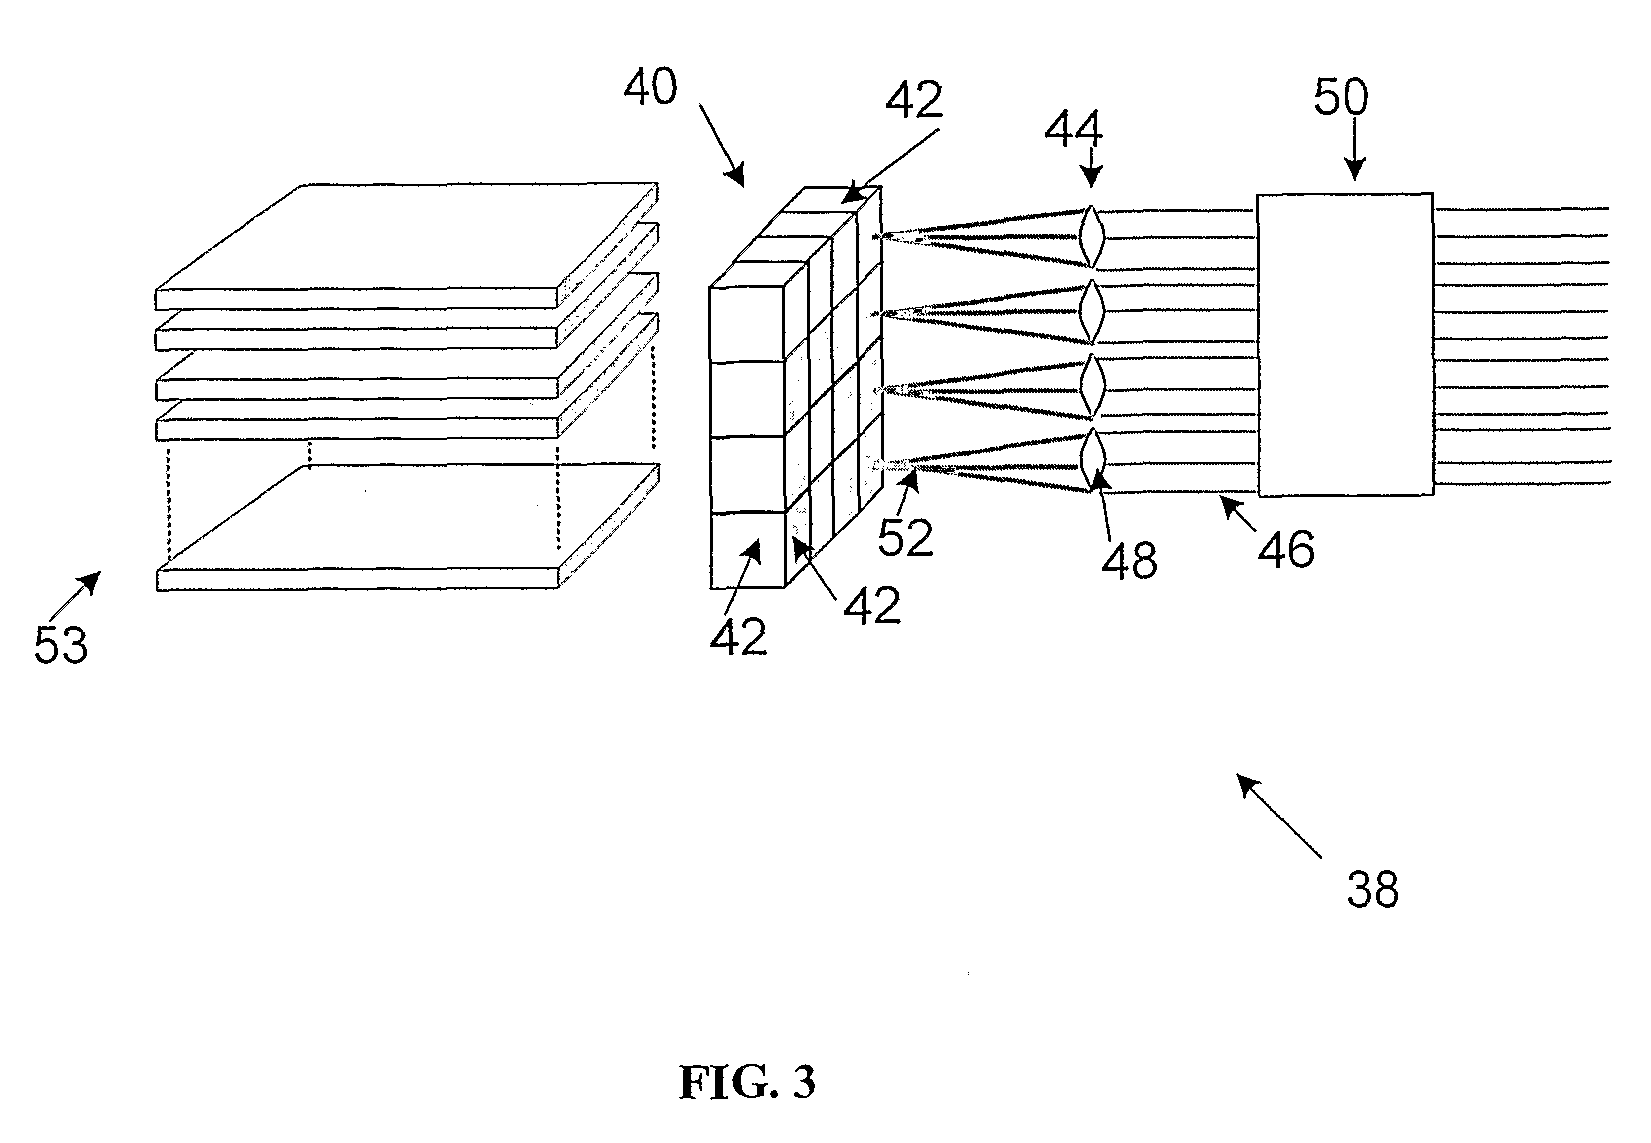 Apparatus for use in operator training with, and the testing and evaluation of, infrared sensors which are for missile detection